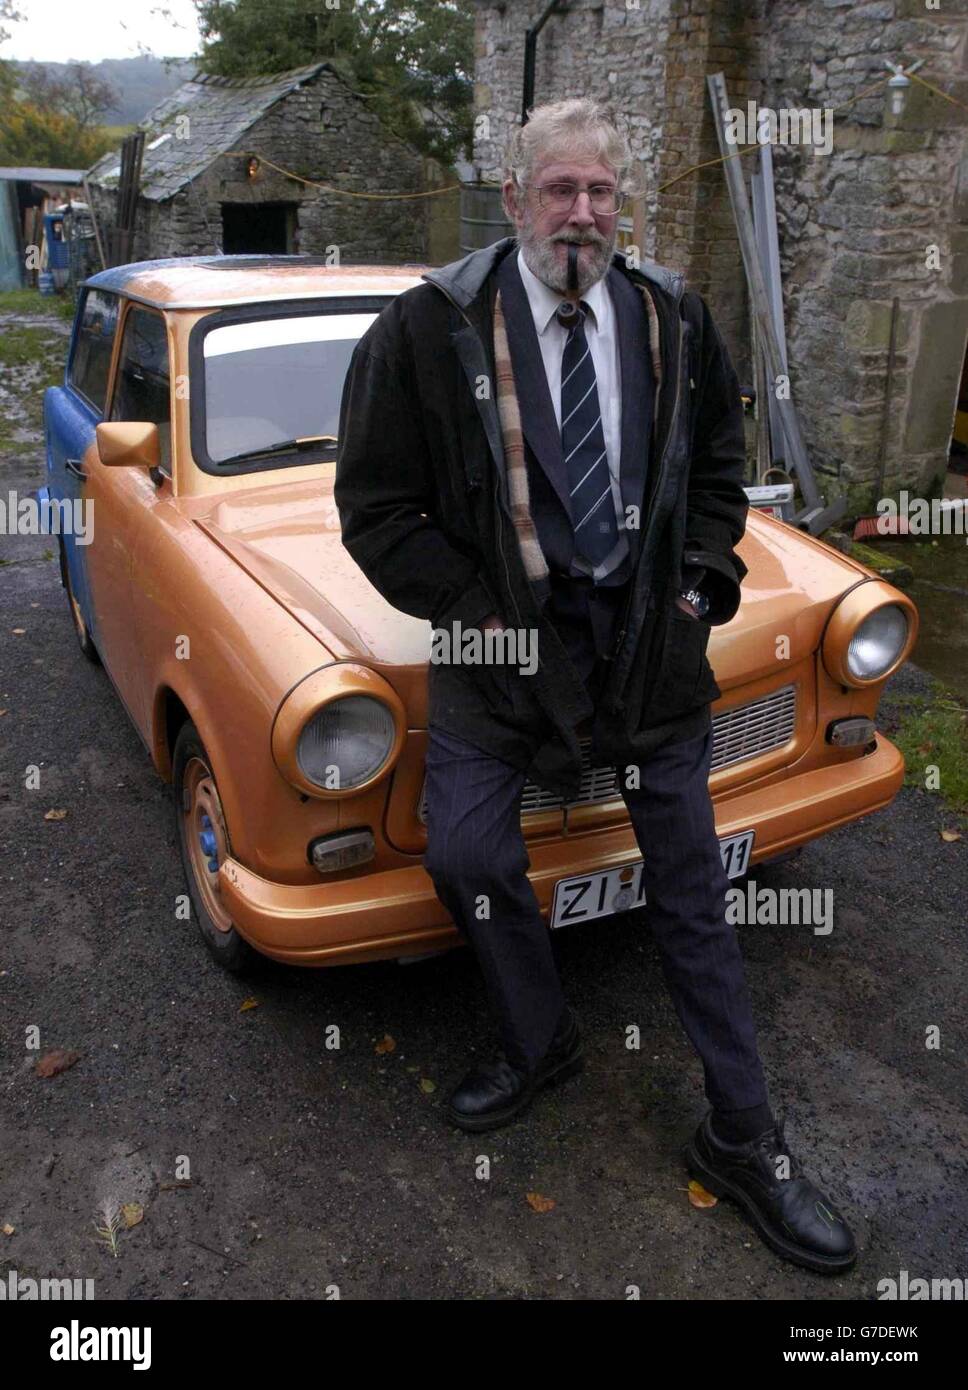 Graham Goodal with his current Trabant car outside his home at Middleton by Youlgreave. Retired engineer Graham Goodall, is to appear at North East Derbyshire Magistrates Court, Wednesday 20th October accused of refusing to remove the world's largest private collection of East German Trabant cars from an orchard. Mr Goodall has 49 Trabants cars in his property at Middleton by Youlgreave. Stock Photo